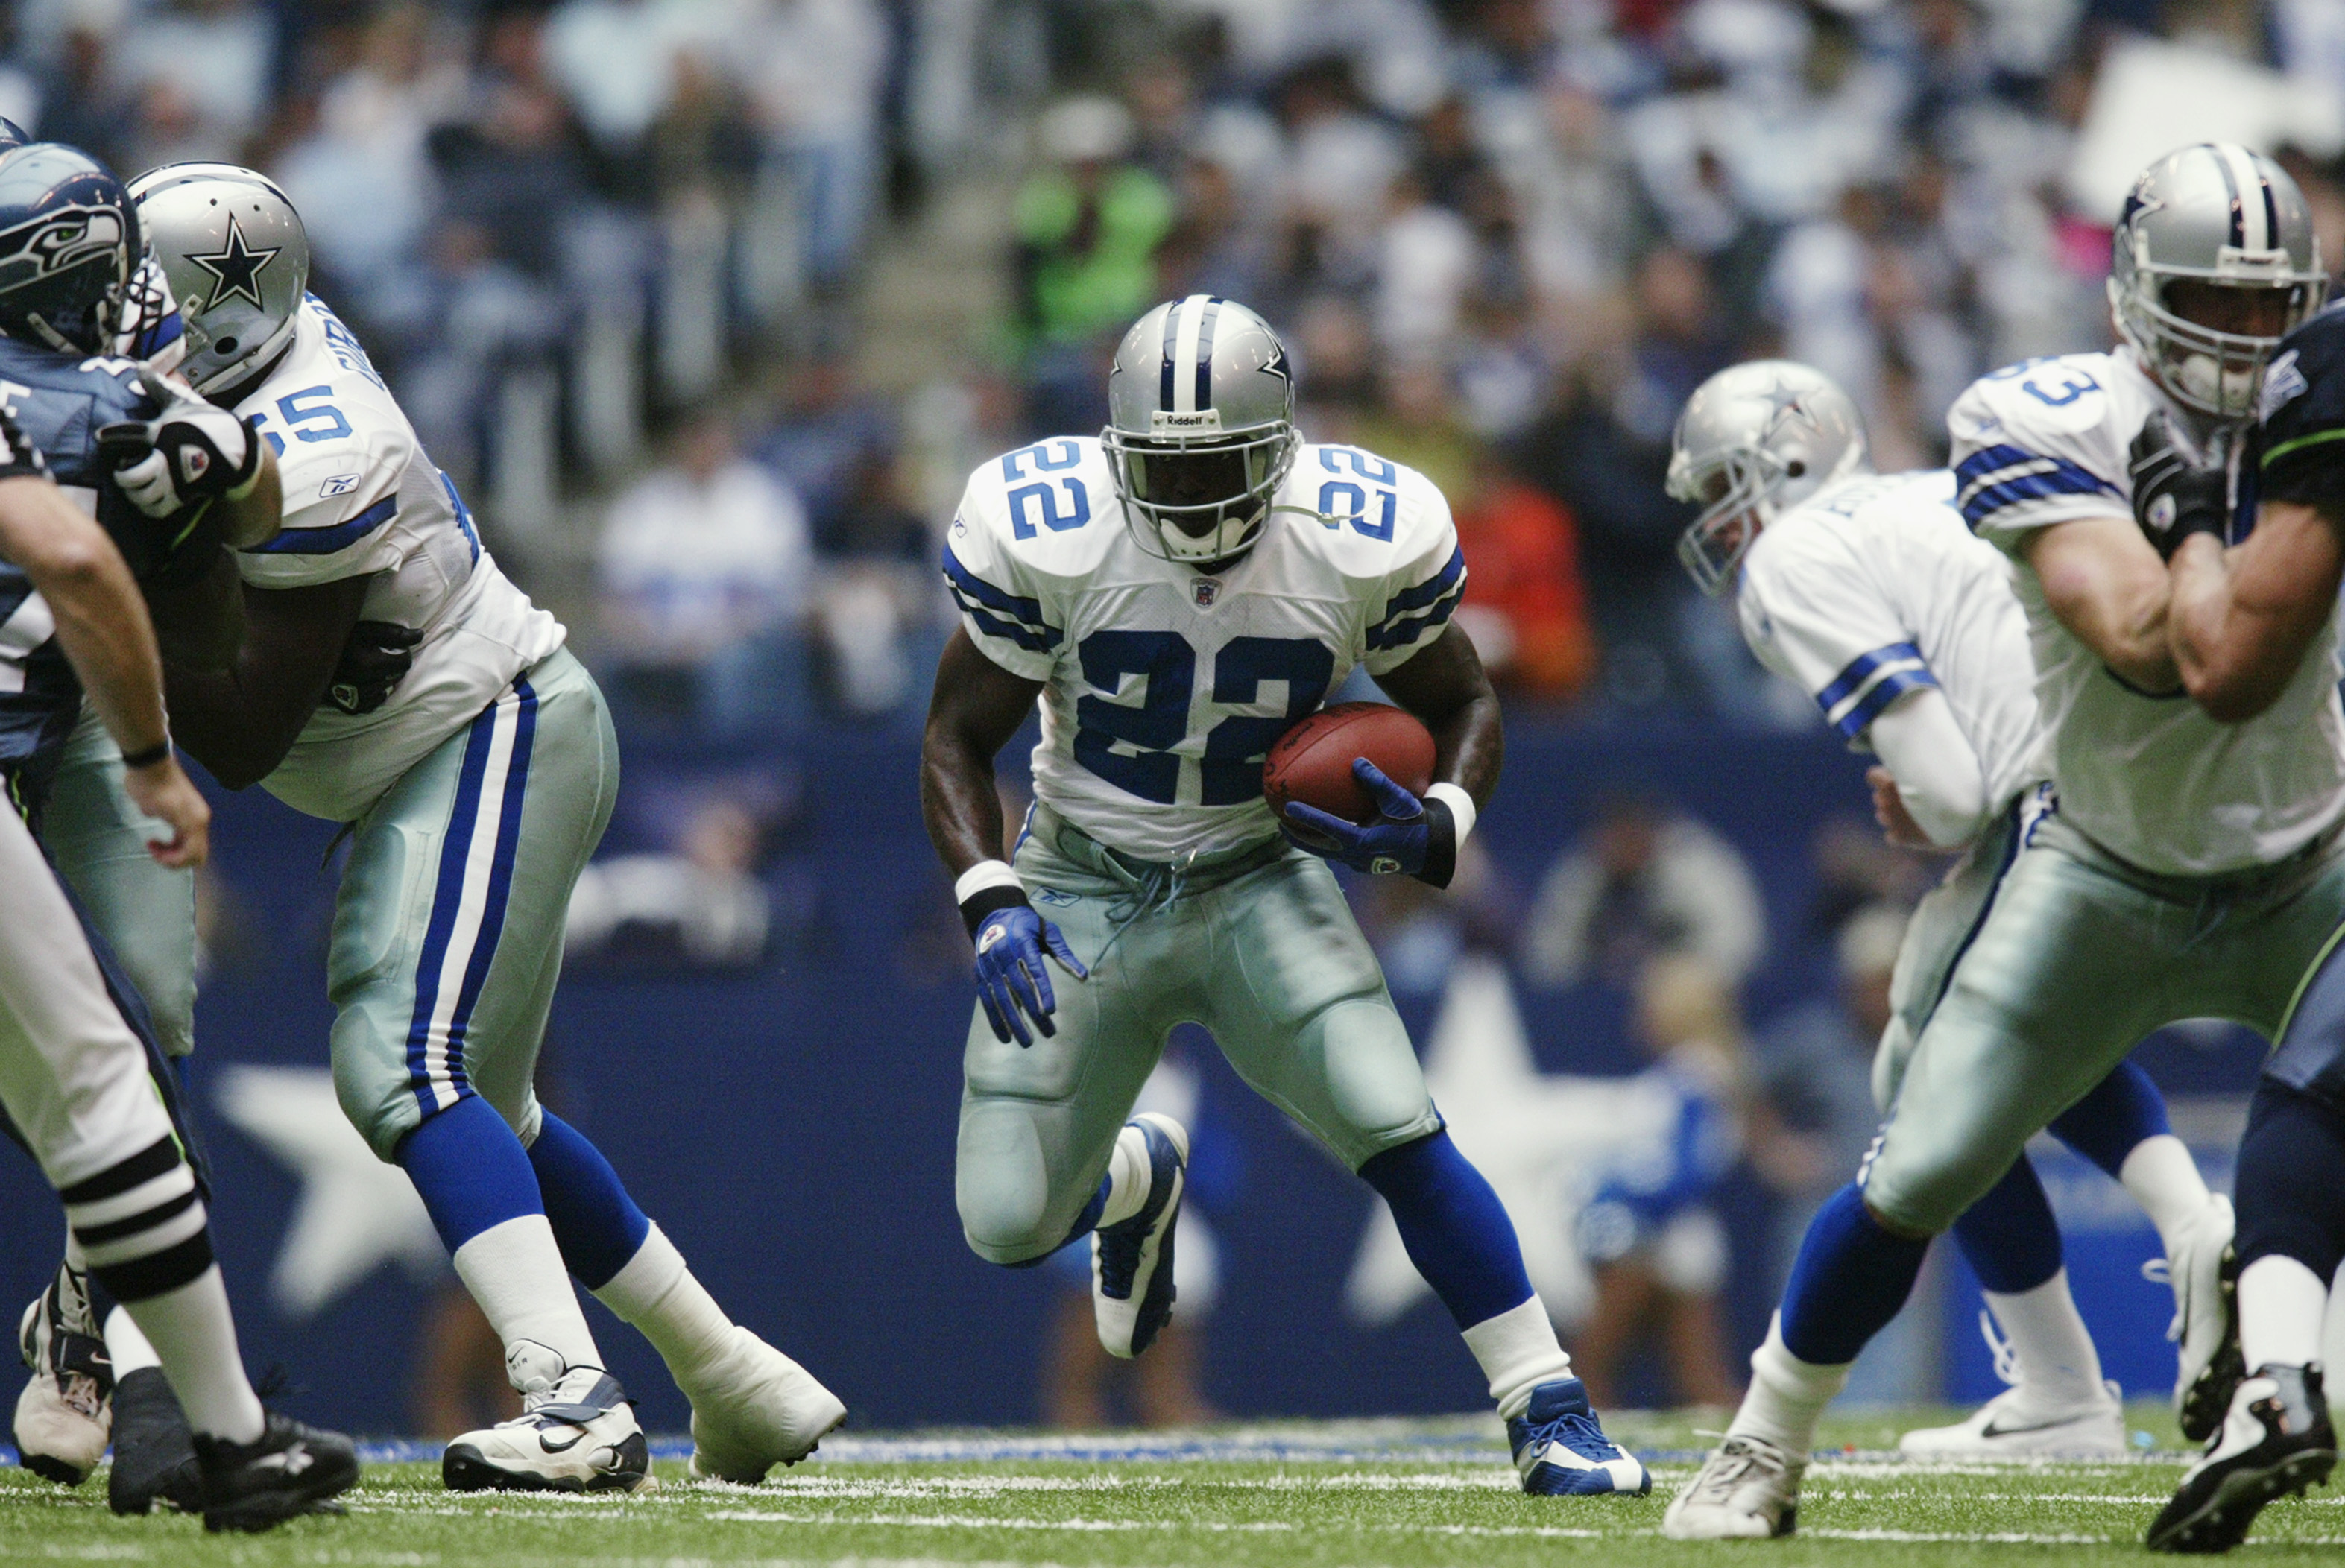 IRVING, TX - OCTOBER 27:   Running Back Emmitt Smith #22 of the Dallas Cowboys advances the ball during the NFL game against the Seattle Seahawks at Texas Stadium on October 27, 2002 in Irving, Texas. The Seahawks defeated the Cowboys 17-14. (Photo by Ron